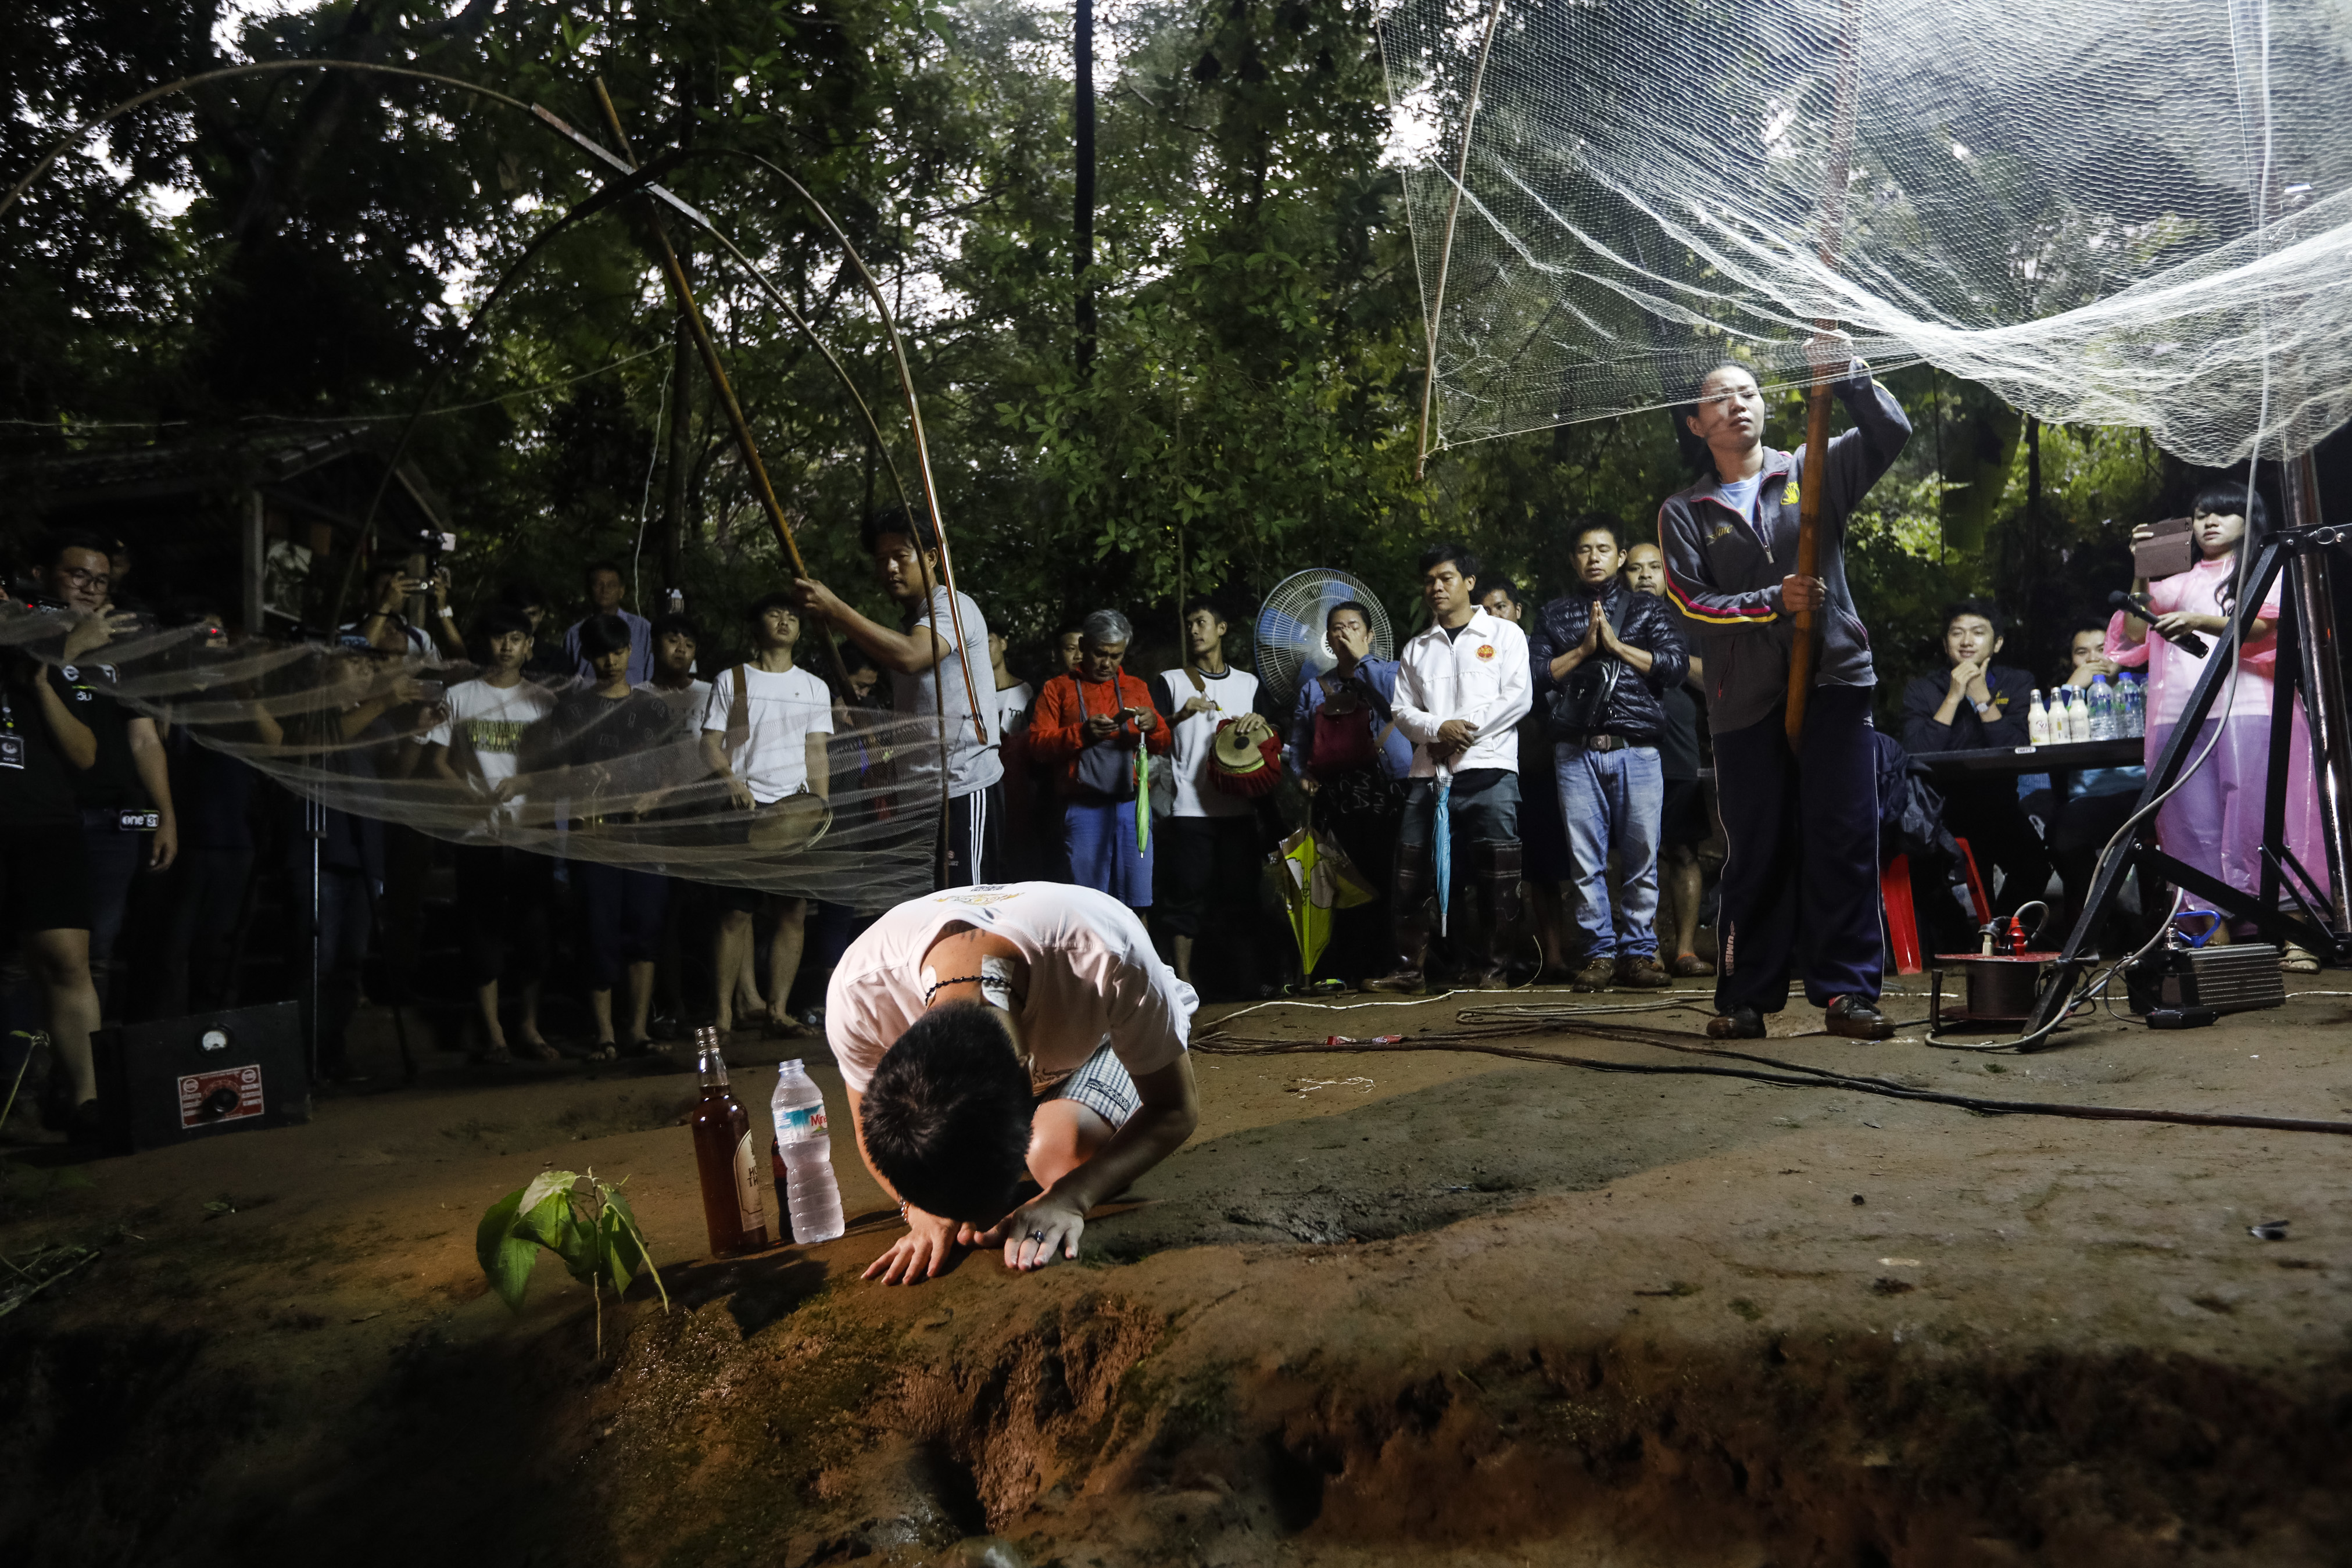 Family members pray at the entrance of Tham Luang cave while rescue personnel conduct operations to find the missing members of the children's football team and their coach at the cave in Khun Nam Nang Non Forest Park in Chiang Rai province on June 26, 2018. (Krit Phromsakla Na—AFP/Getty Images)